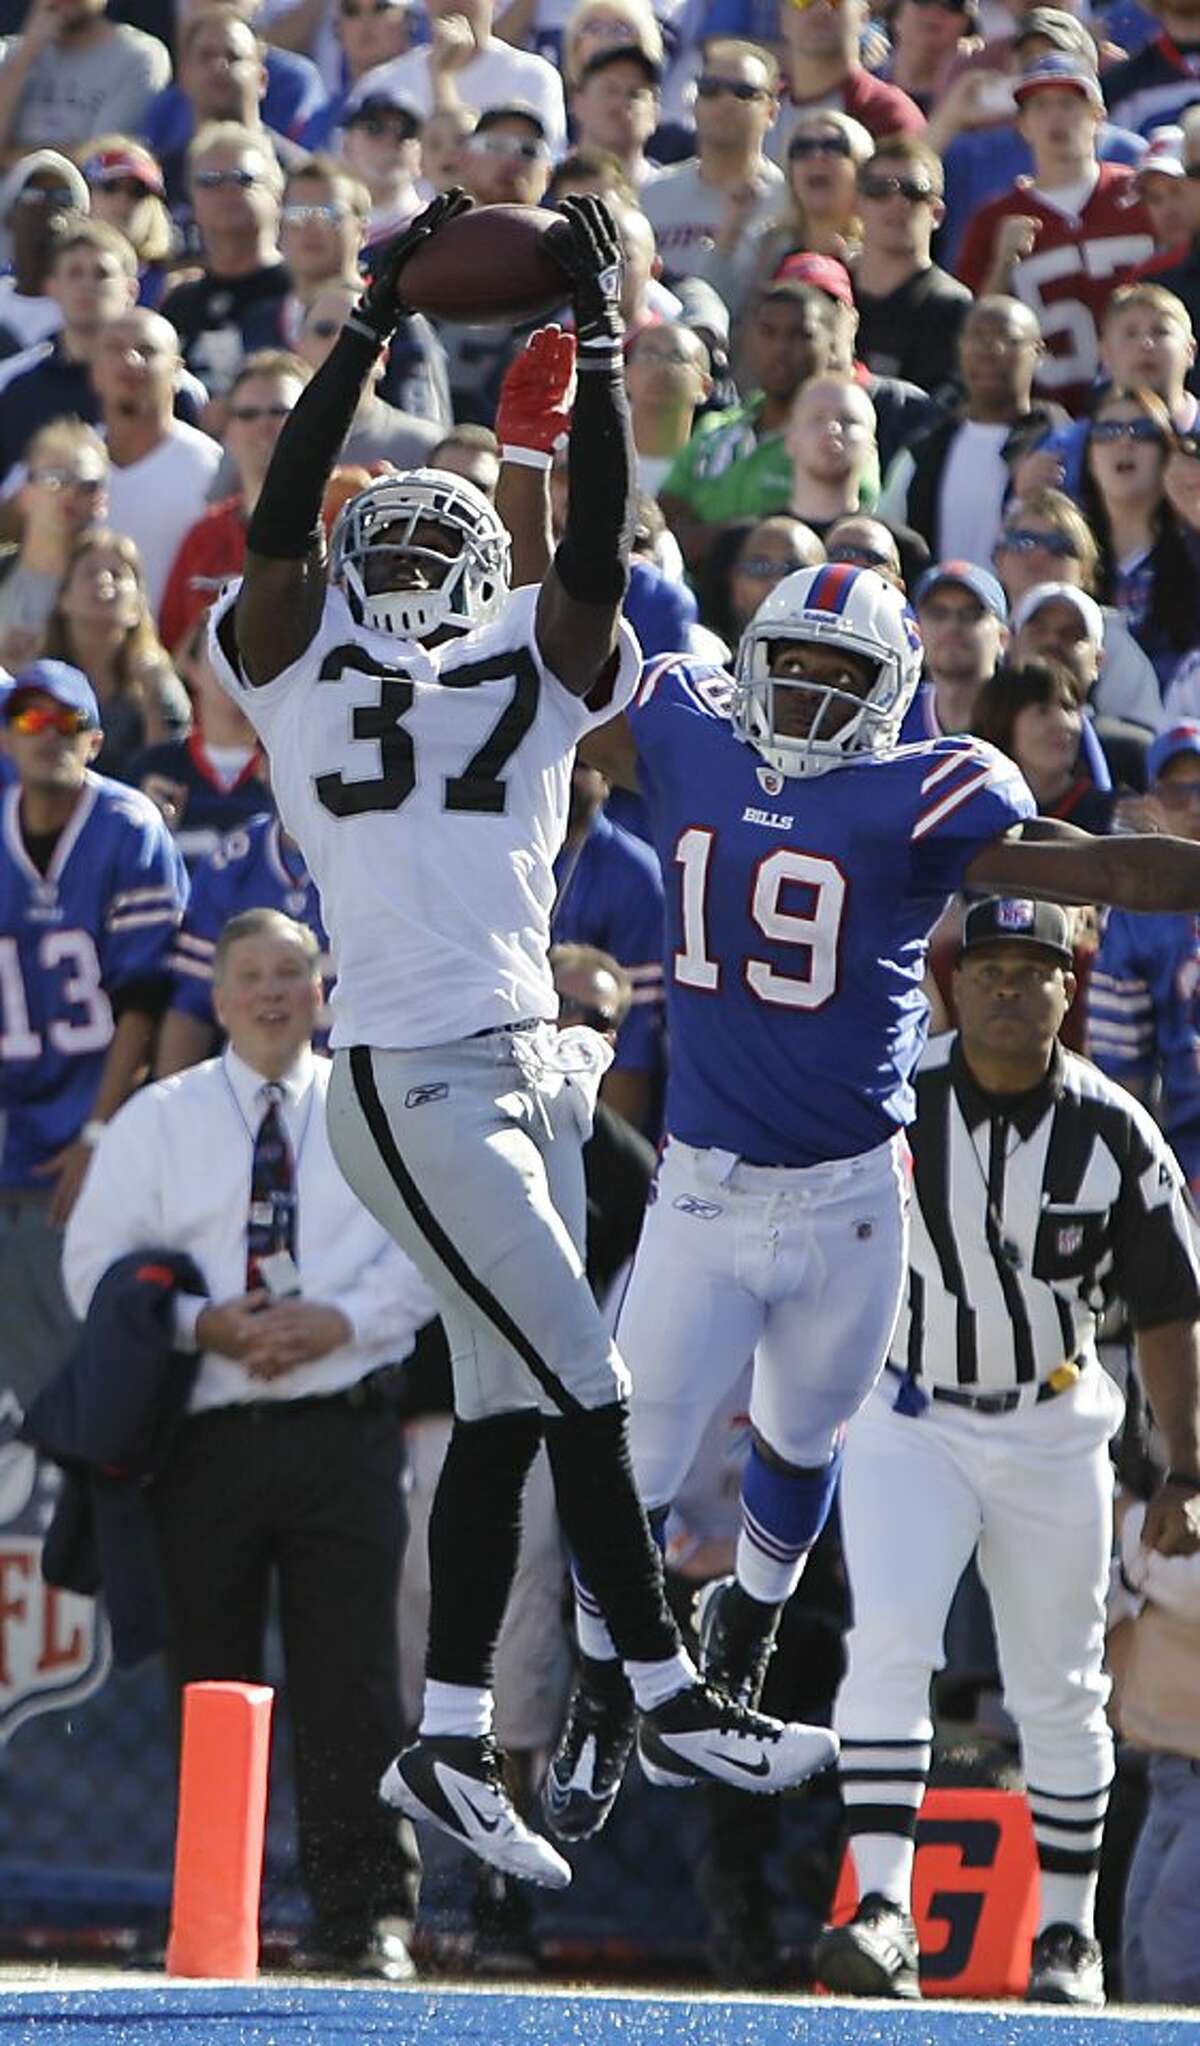 Oakland Raiders' Chris Johnson (37) breaks up a pass intended for Buffalo Bills' Donald Jones (19) during the second half of an NFL football game in Orchard Park, N.Y., Sunday, Sept. 18, 2011. The Bills won 38-35. (AP Photo/David Duprey)